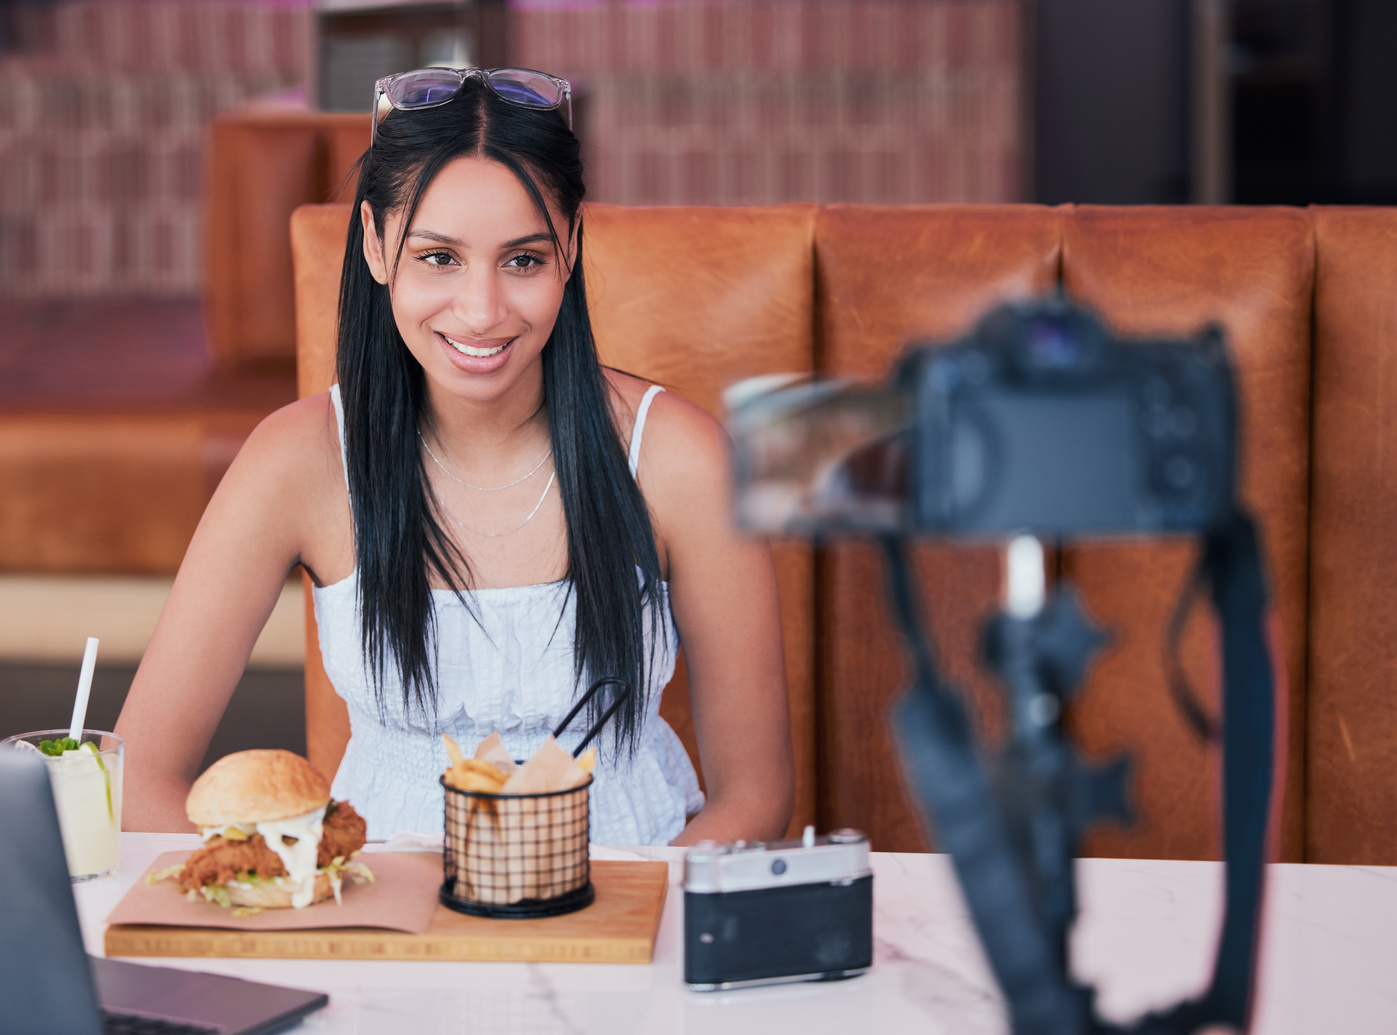 Food Influencer, Internet Speaker at Restaurant with Camera and Recording Cooking Review Social Media Video. Digital Cuisine Web Content Creator or Brand Ambassador Live Streaming to Online Audience.